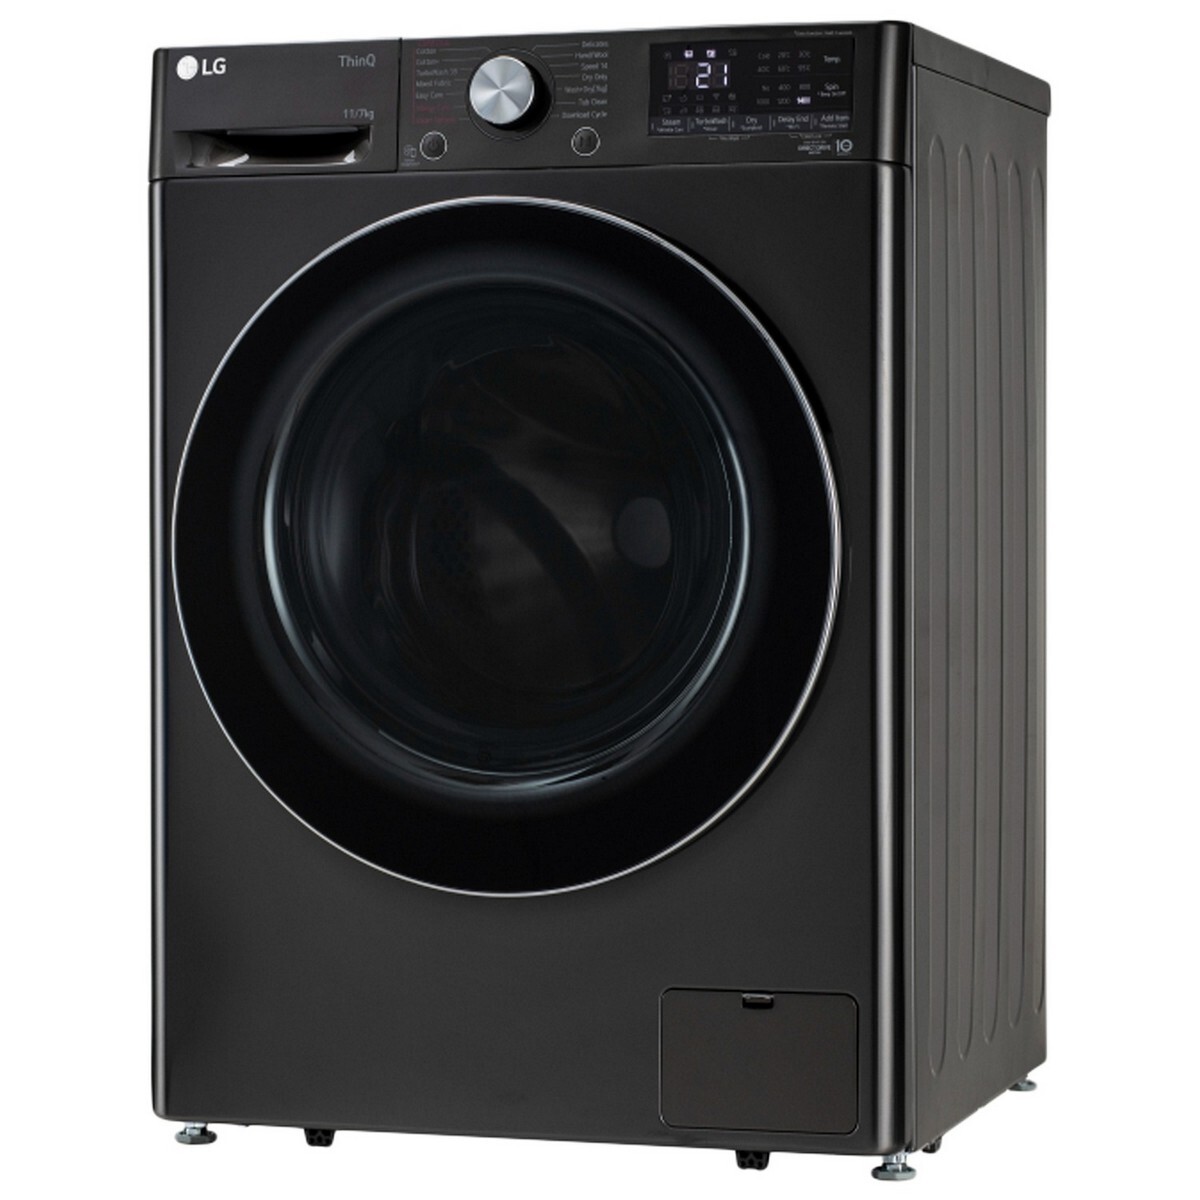 LG Fully Automatic Front Load Washer Dryer FHD1107STB 7 Kg Black VCM